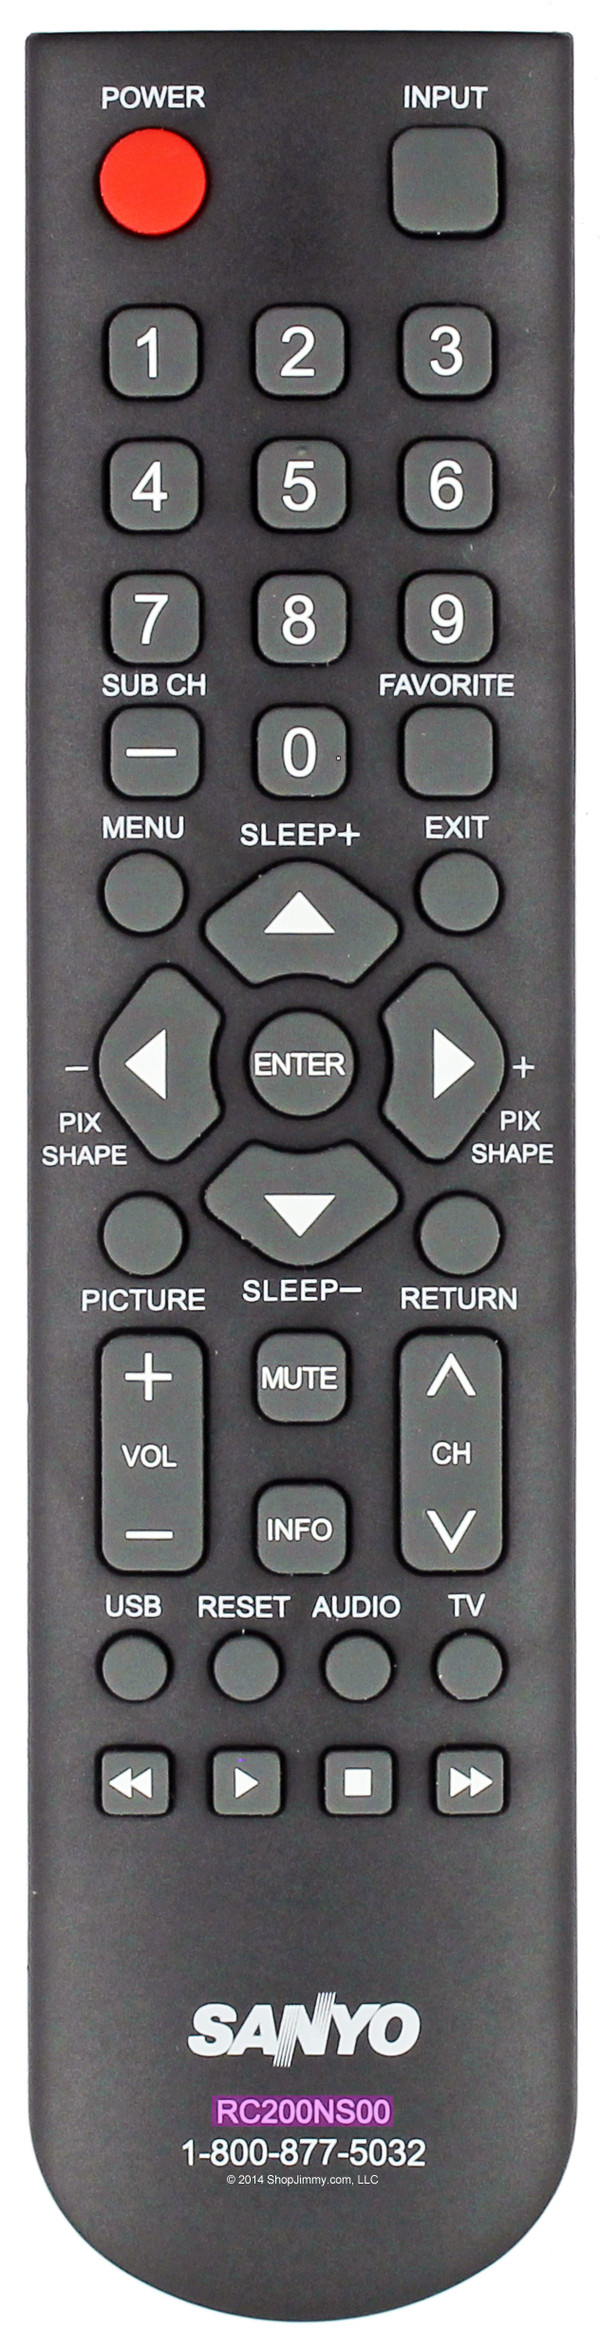 Sanyo RC200NS00 Remote Control - Used